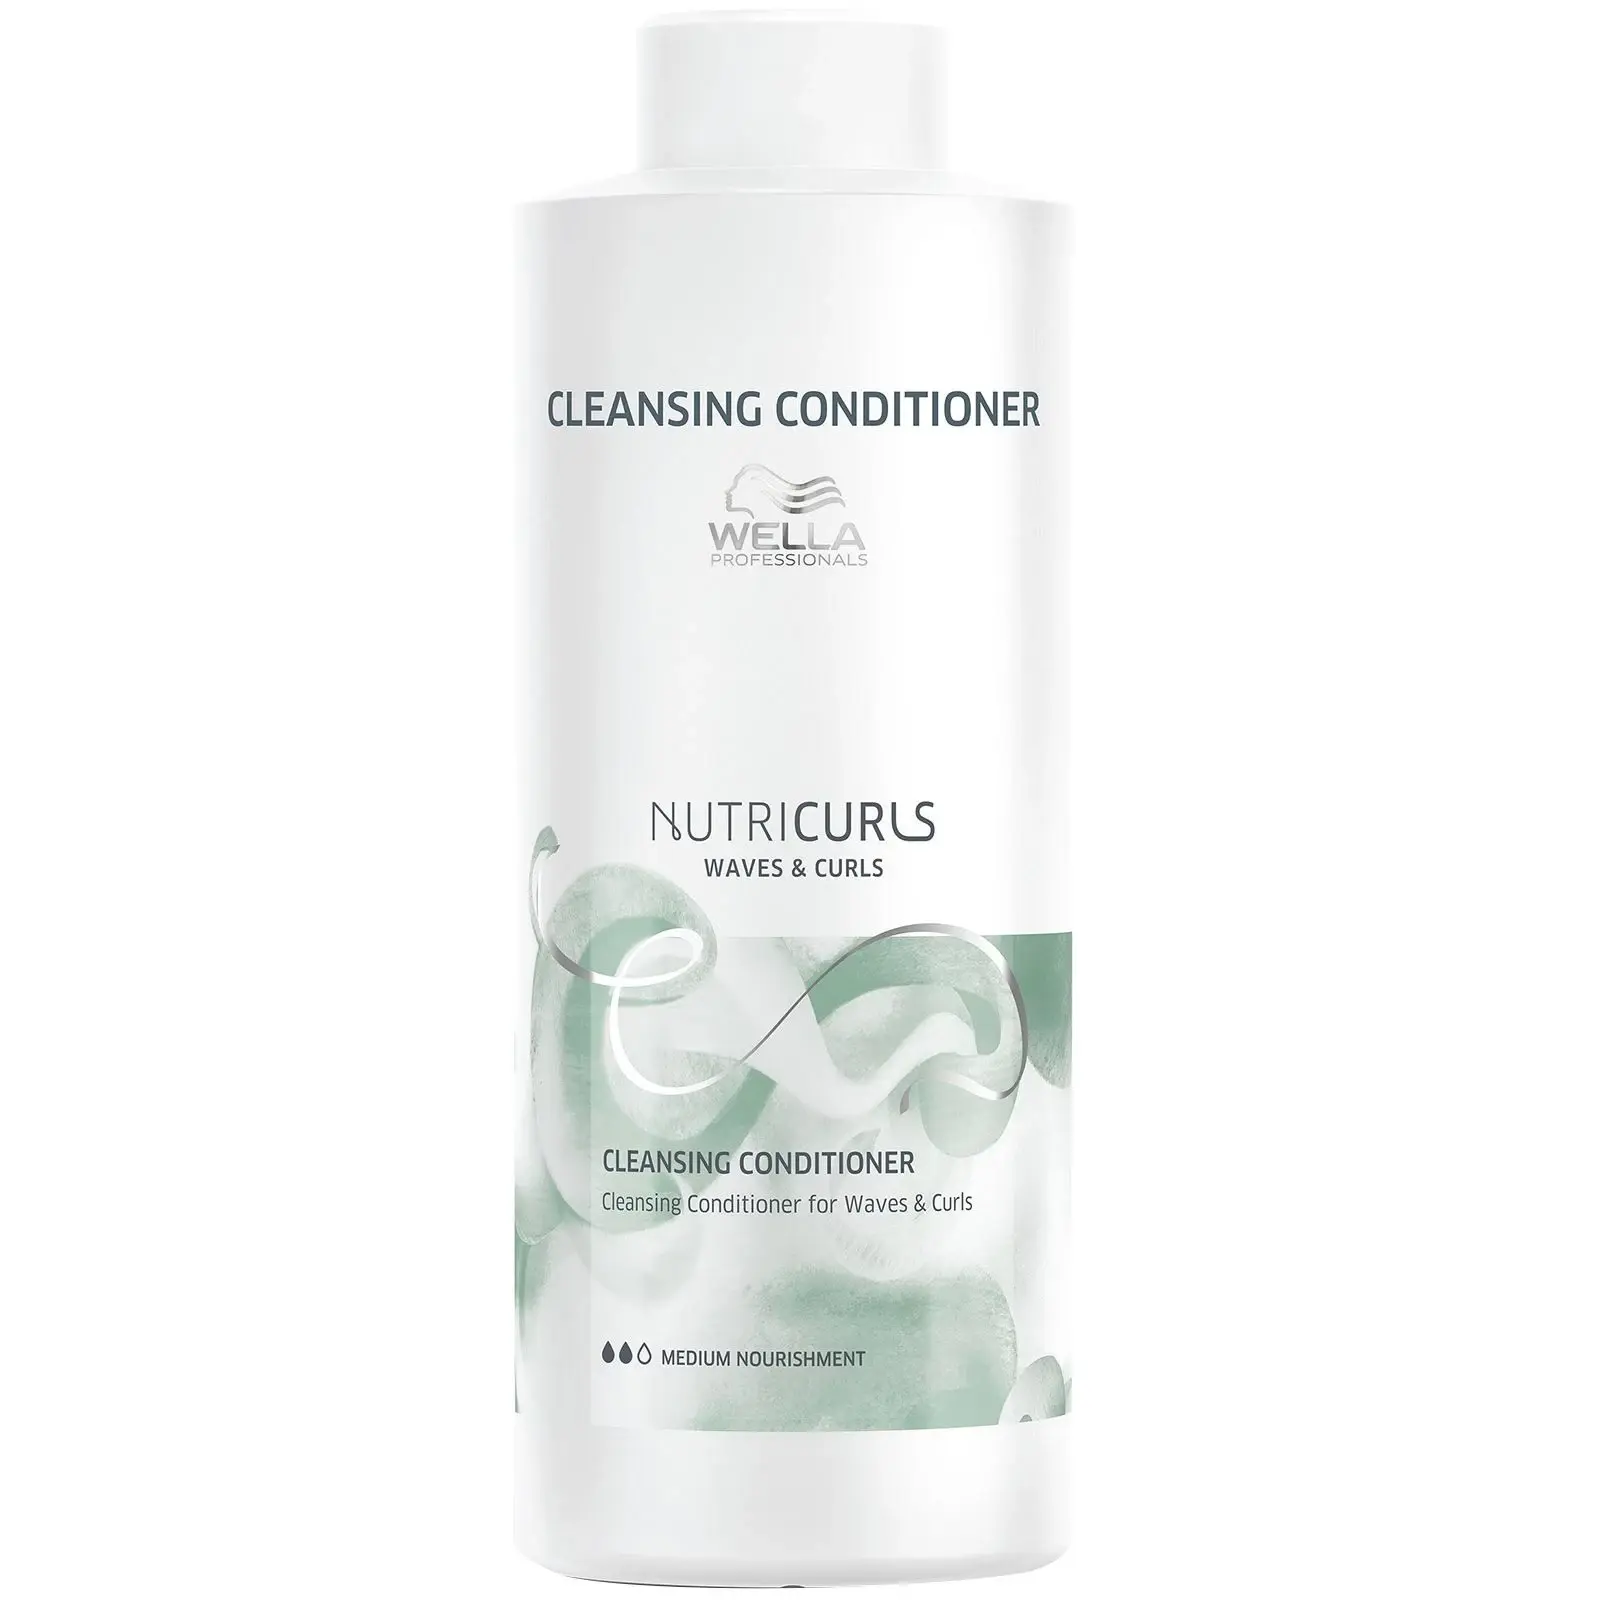 Wella Professionals Nutricurls Cleansing Conditioner for Waves & Curls 1000ml